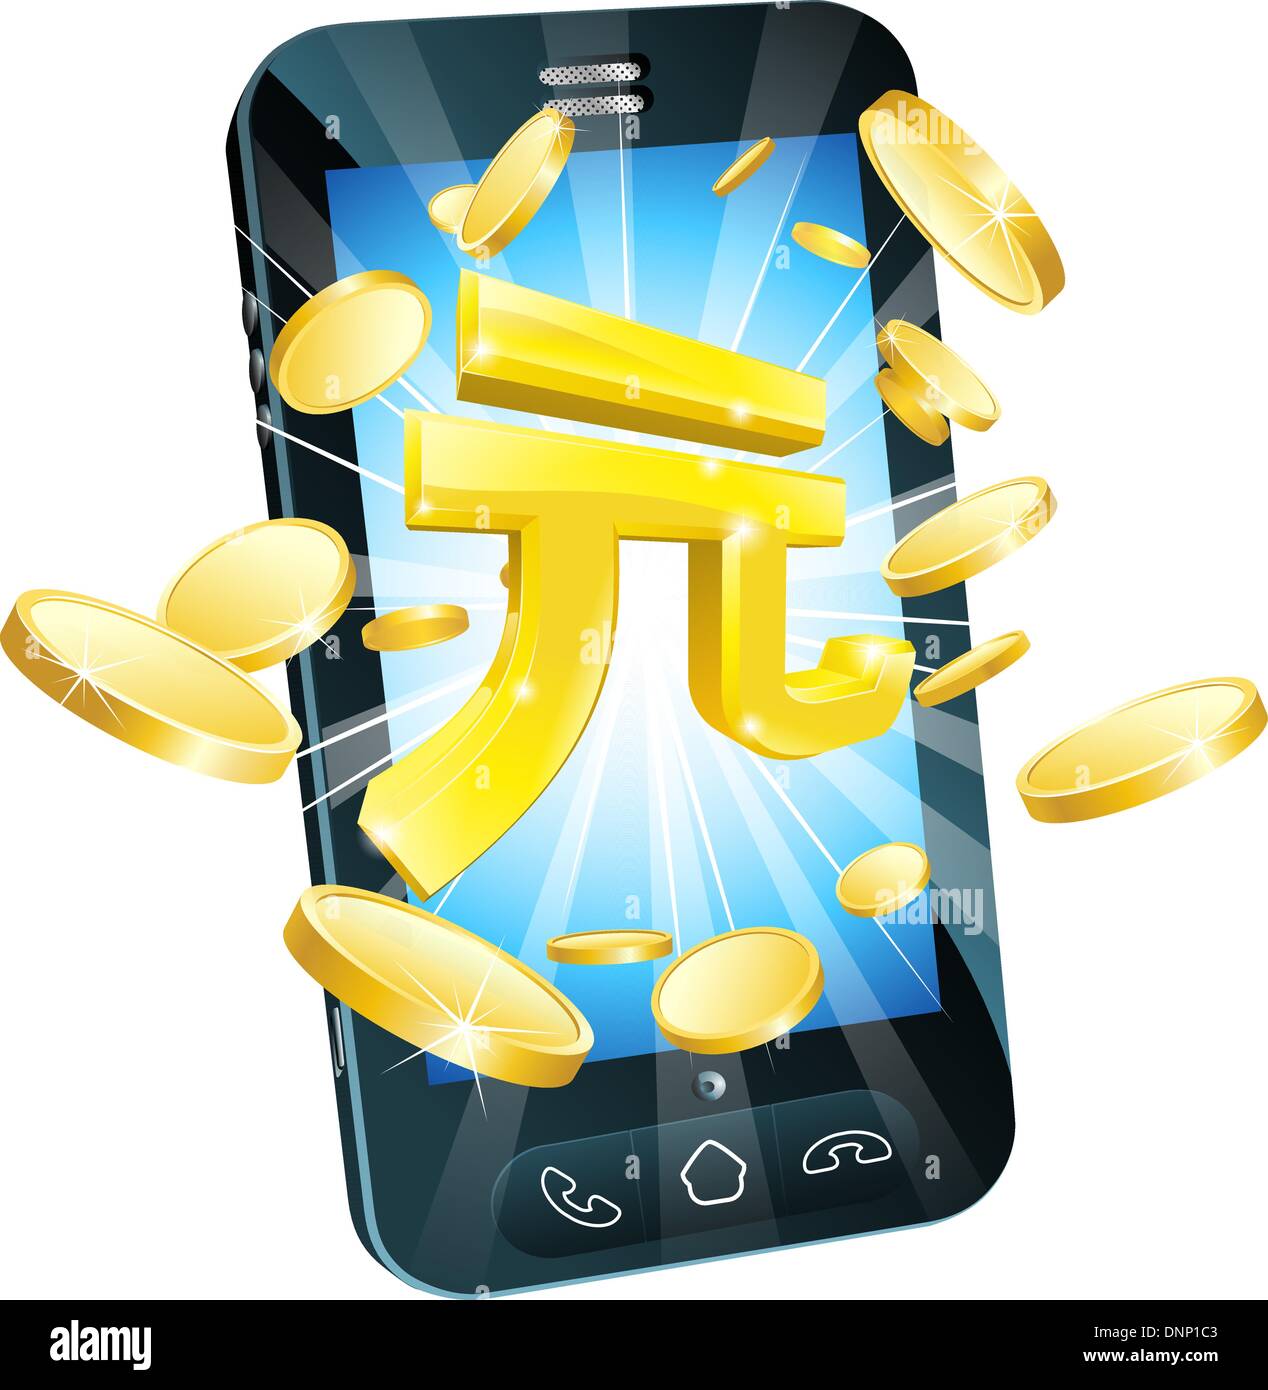 Yuan money phone concept illustration of mobile cell phone with gold Yuan sign and coins Stock Vector